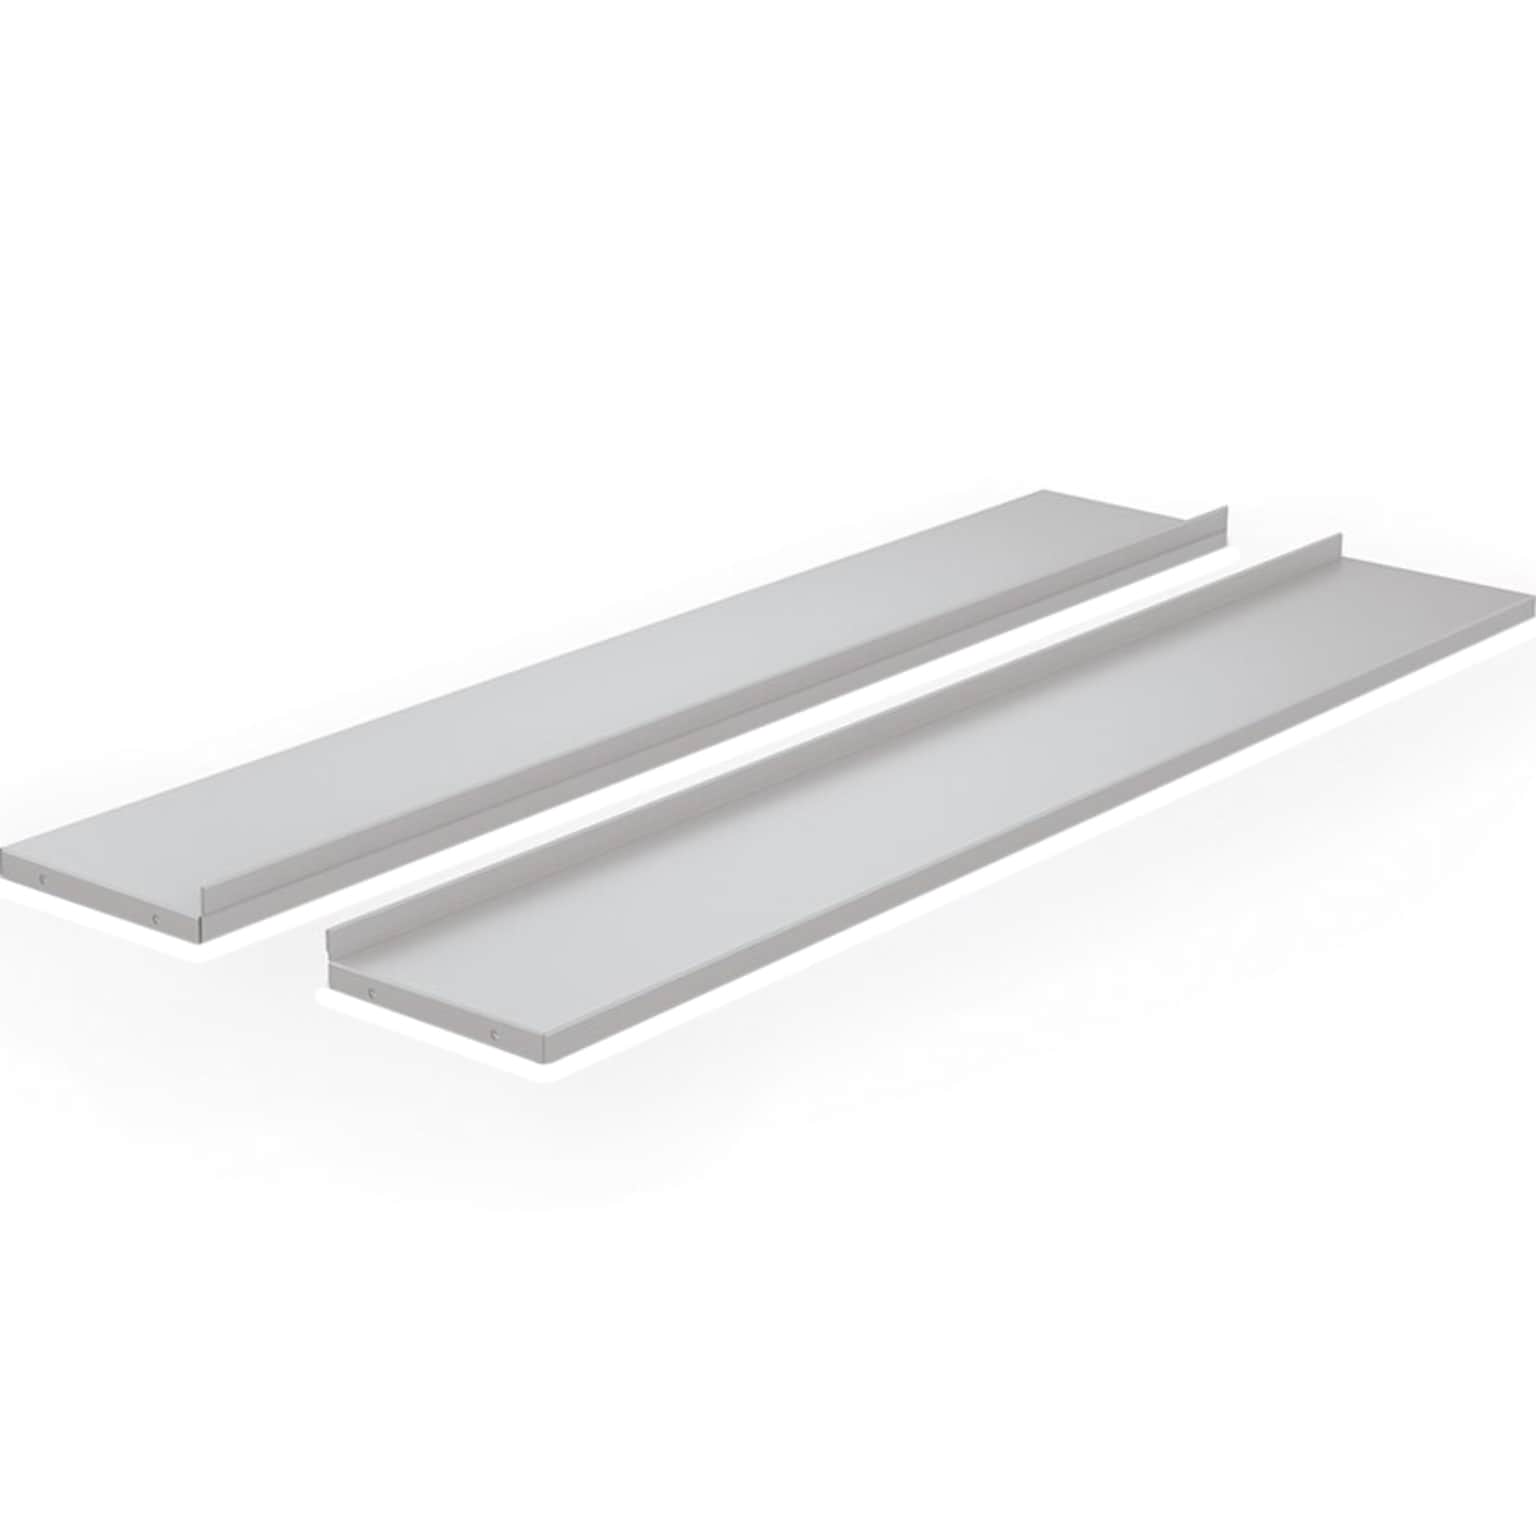 MooreCo Hierarchy 58 Storage Shelf, Cool Gray, 2/Pack (91699)